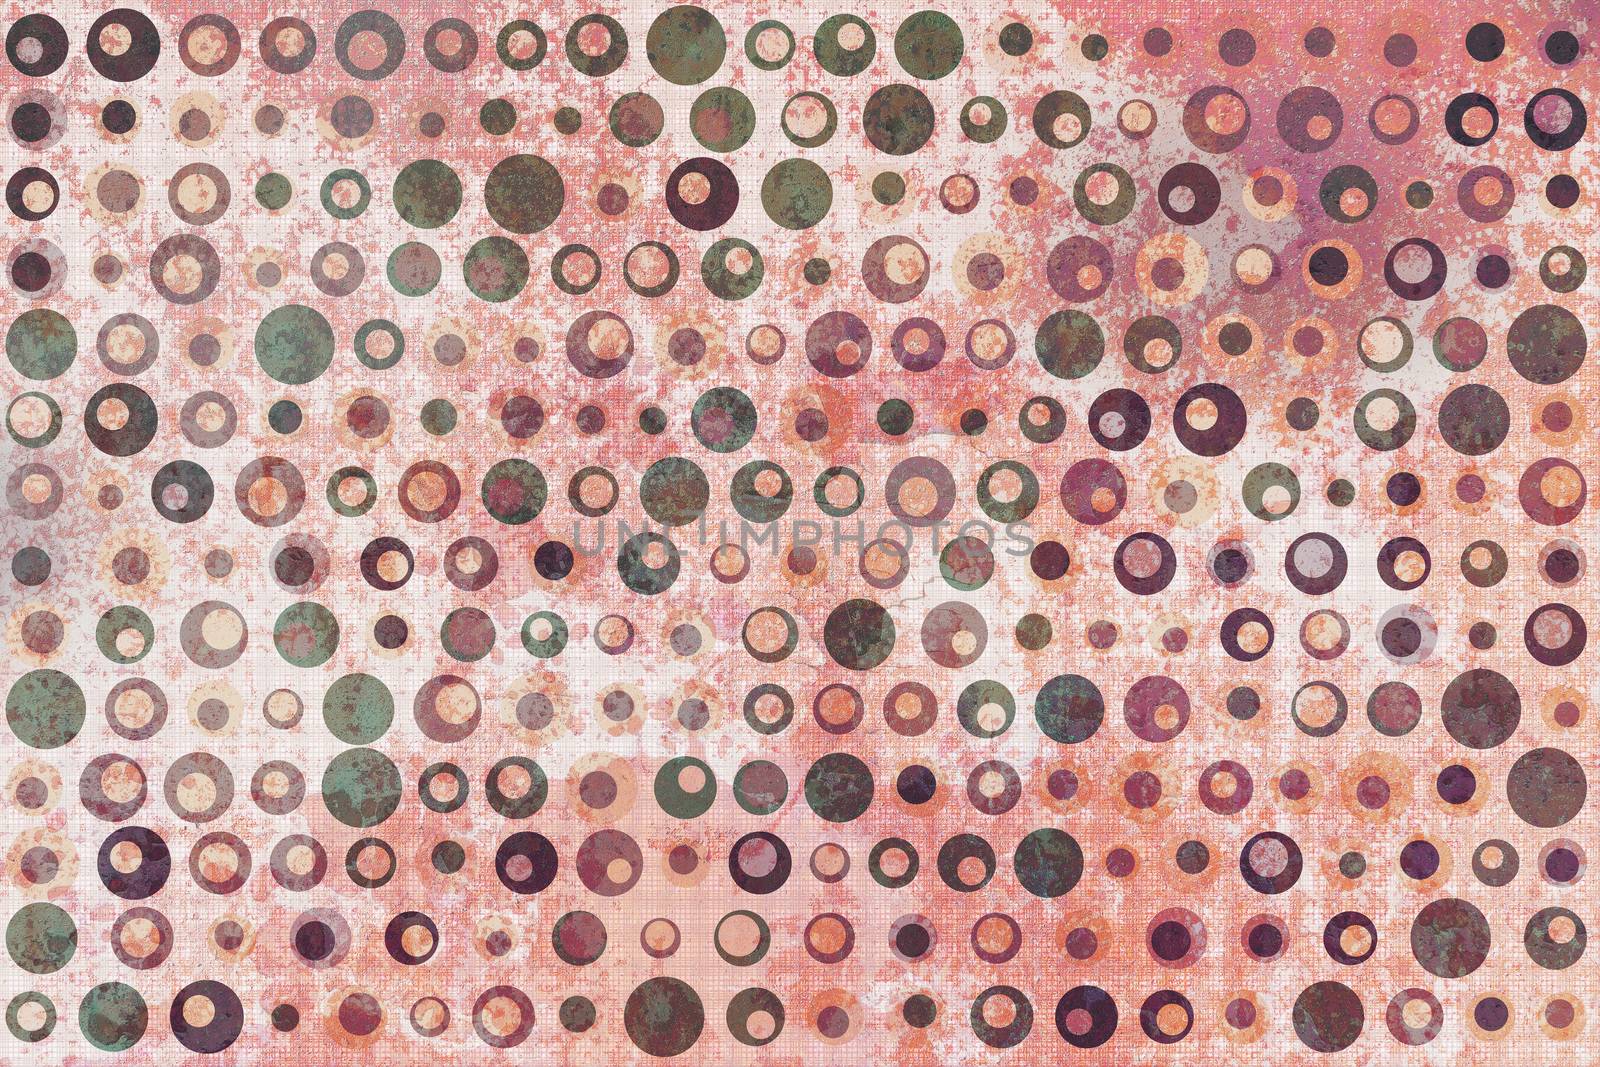 Green, Gray and Brown Dots Texture on Pink and White by MaxalTamor